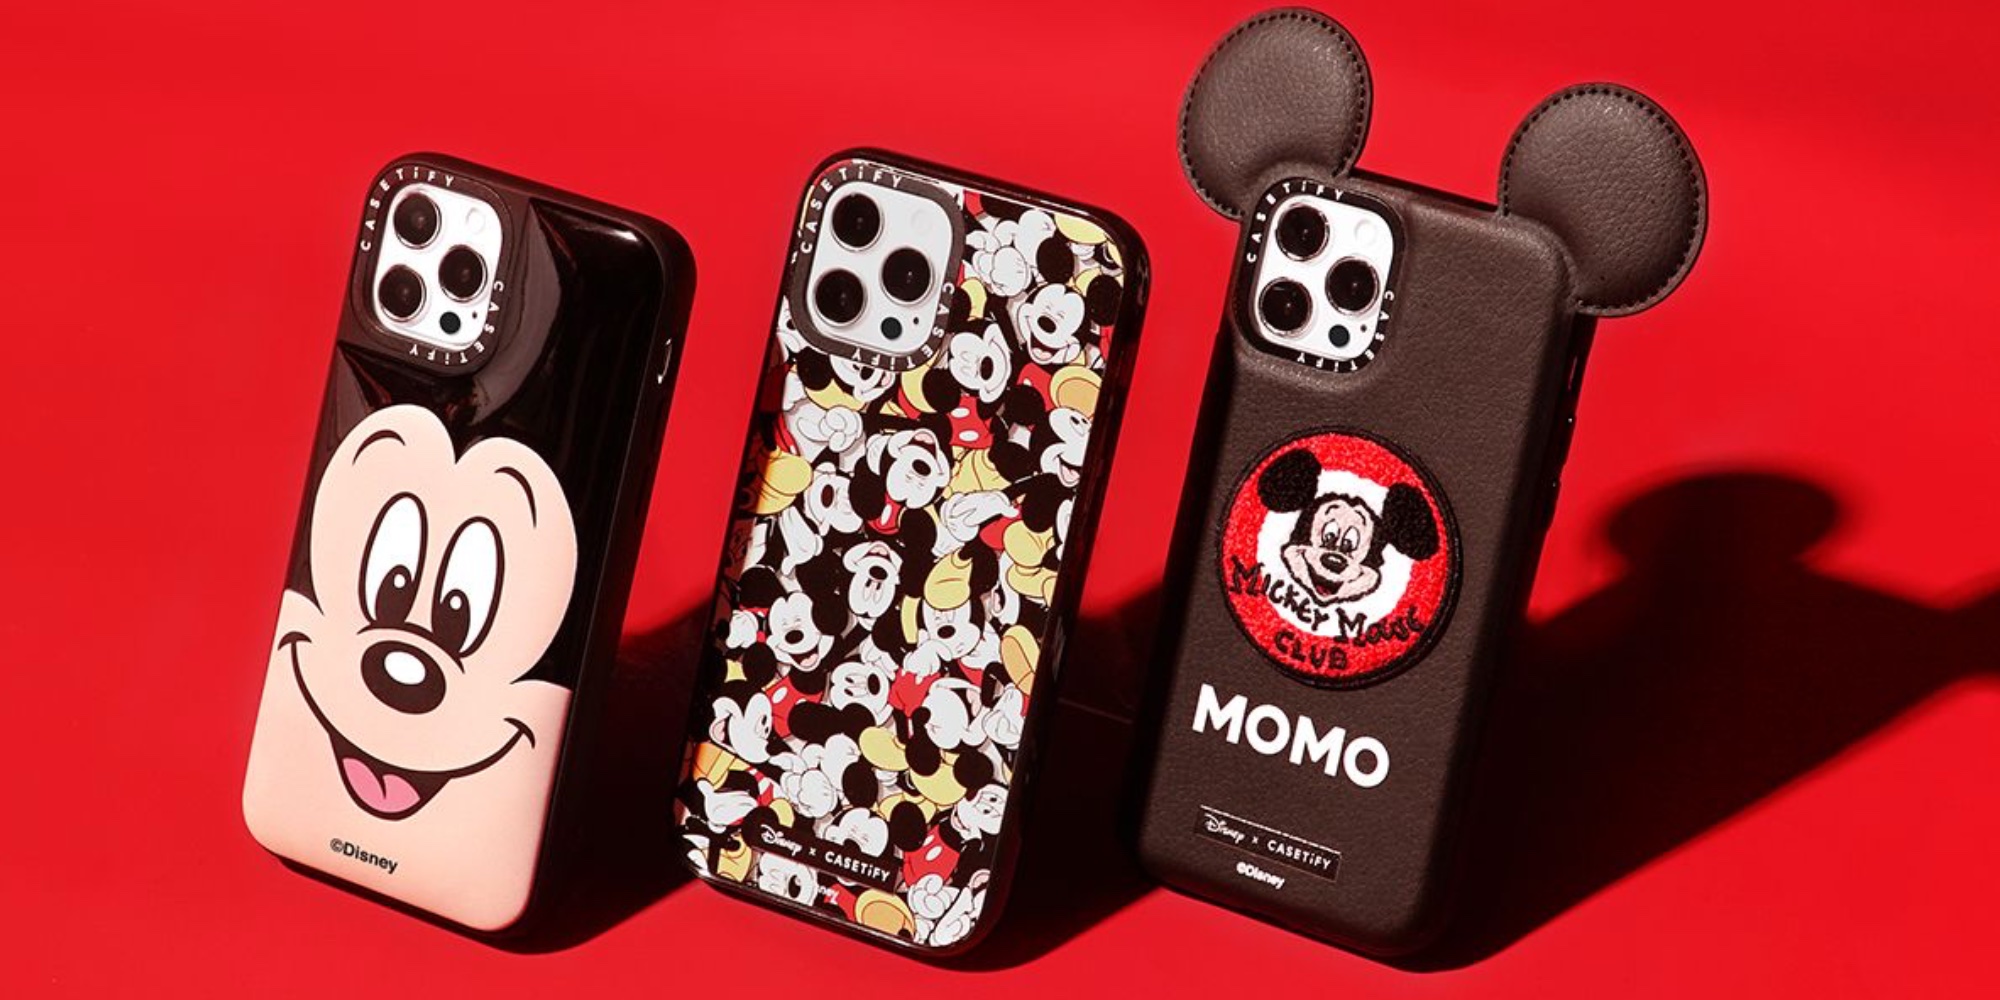 CASETiFY Disney collection drops with iPhone 12 cases, more - 9to5Toys